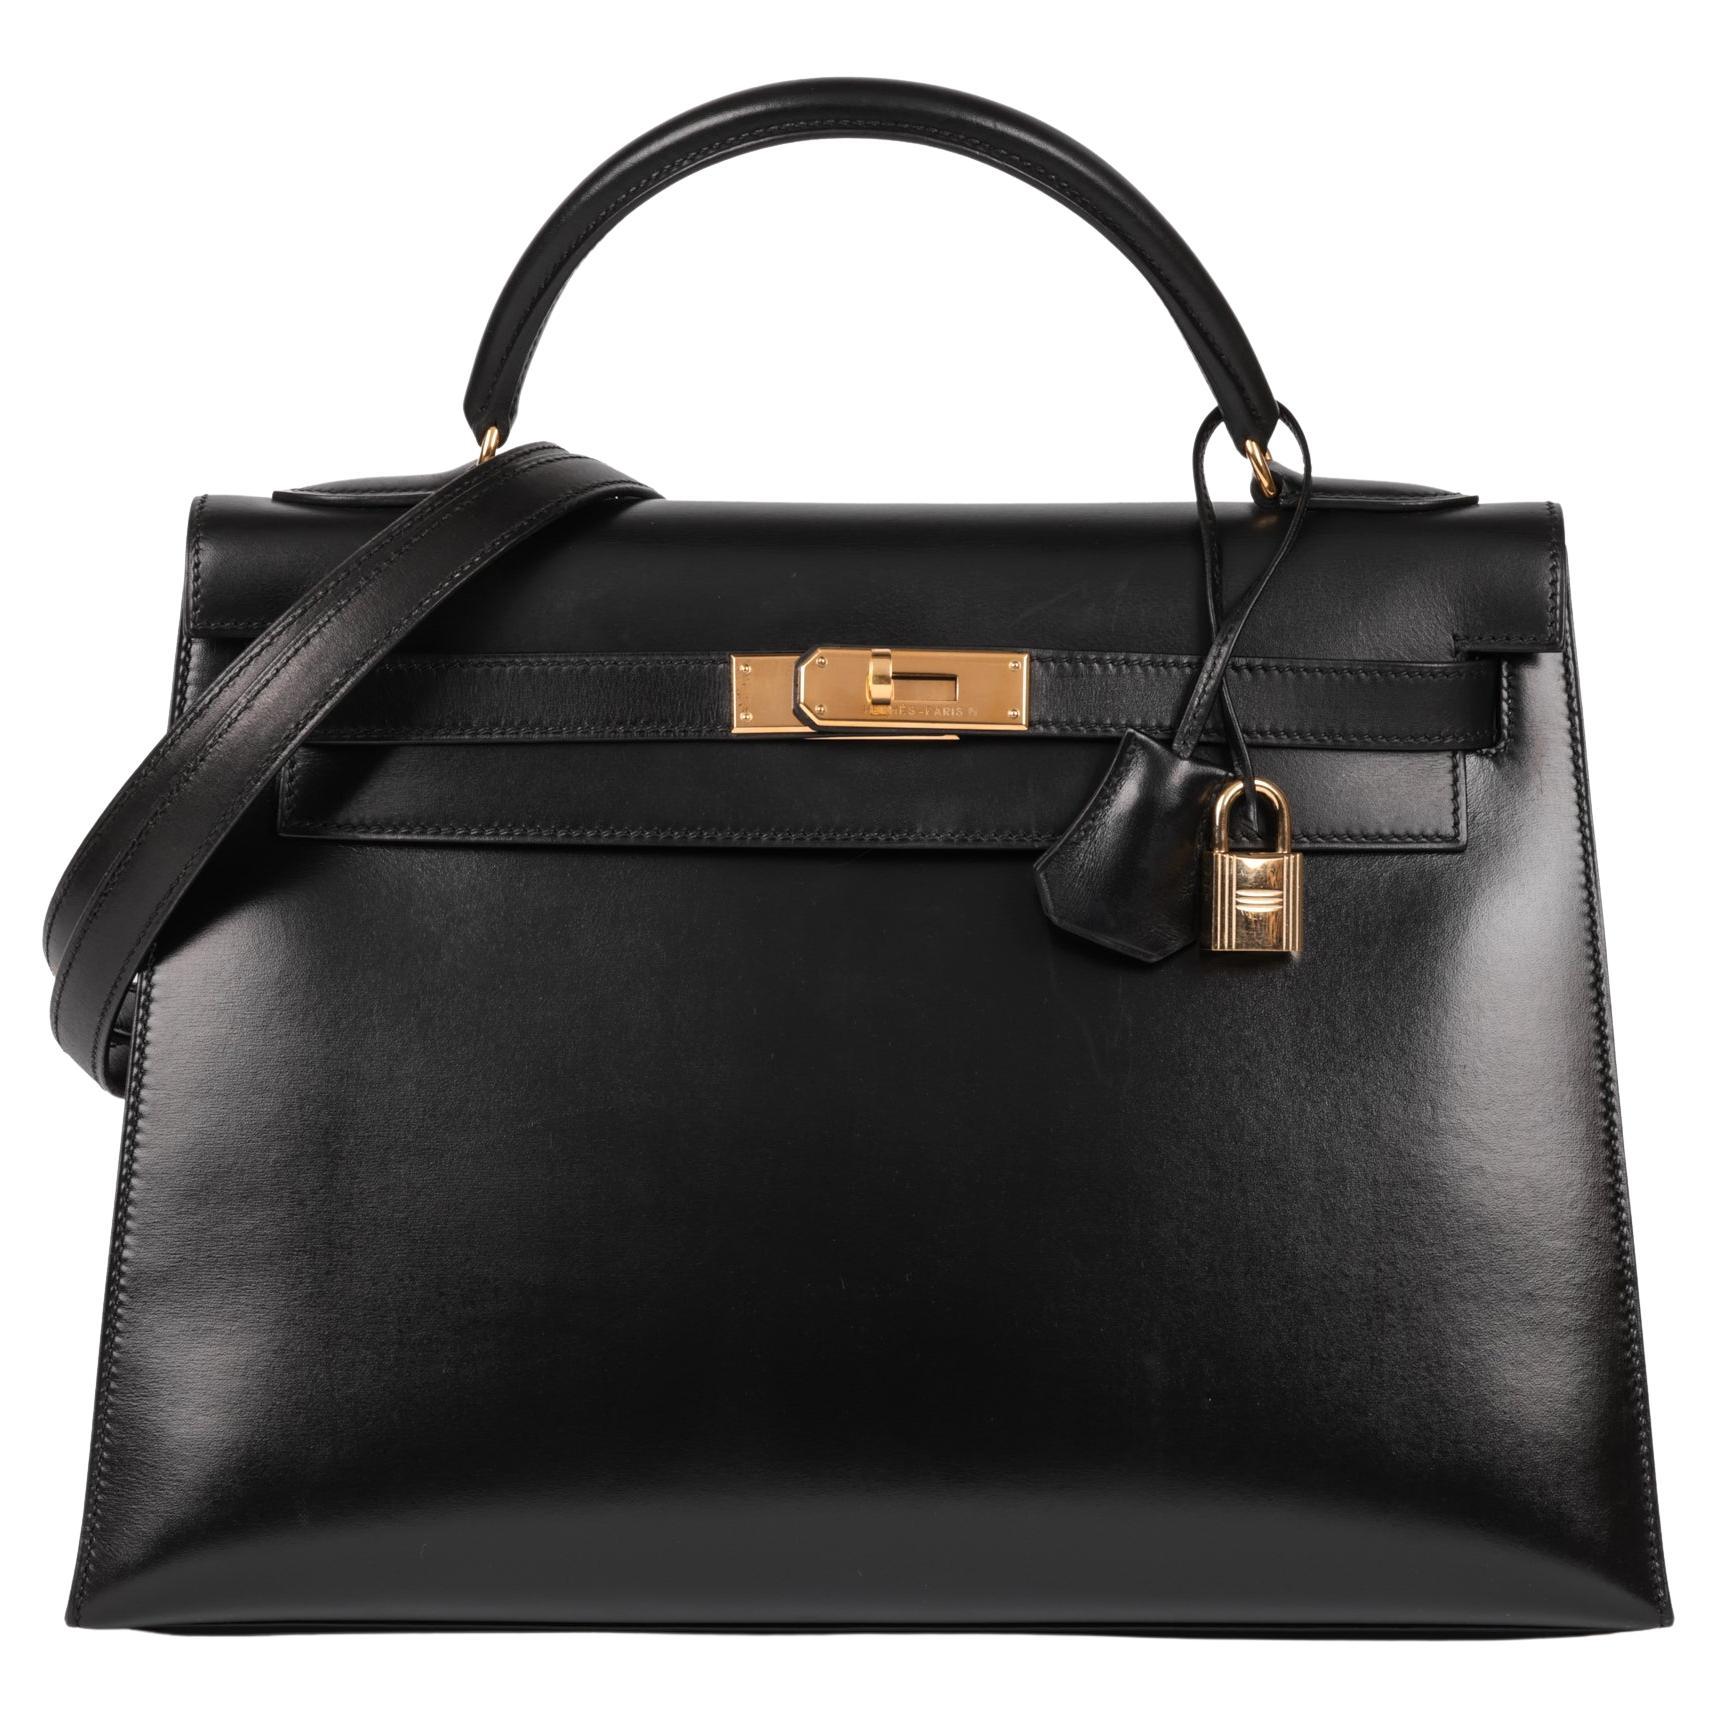 What is the best size kelly bag?